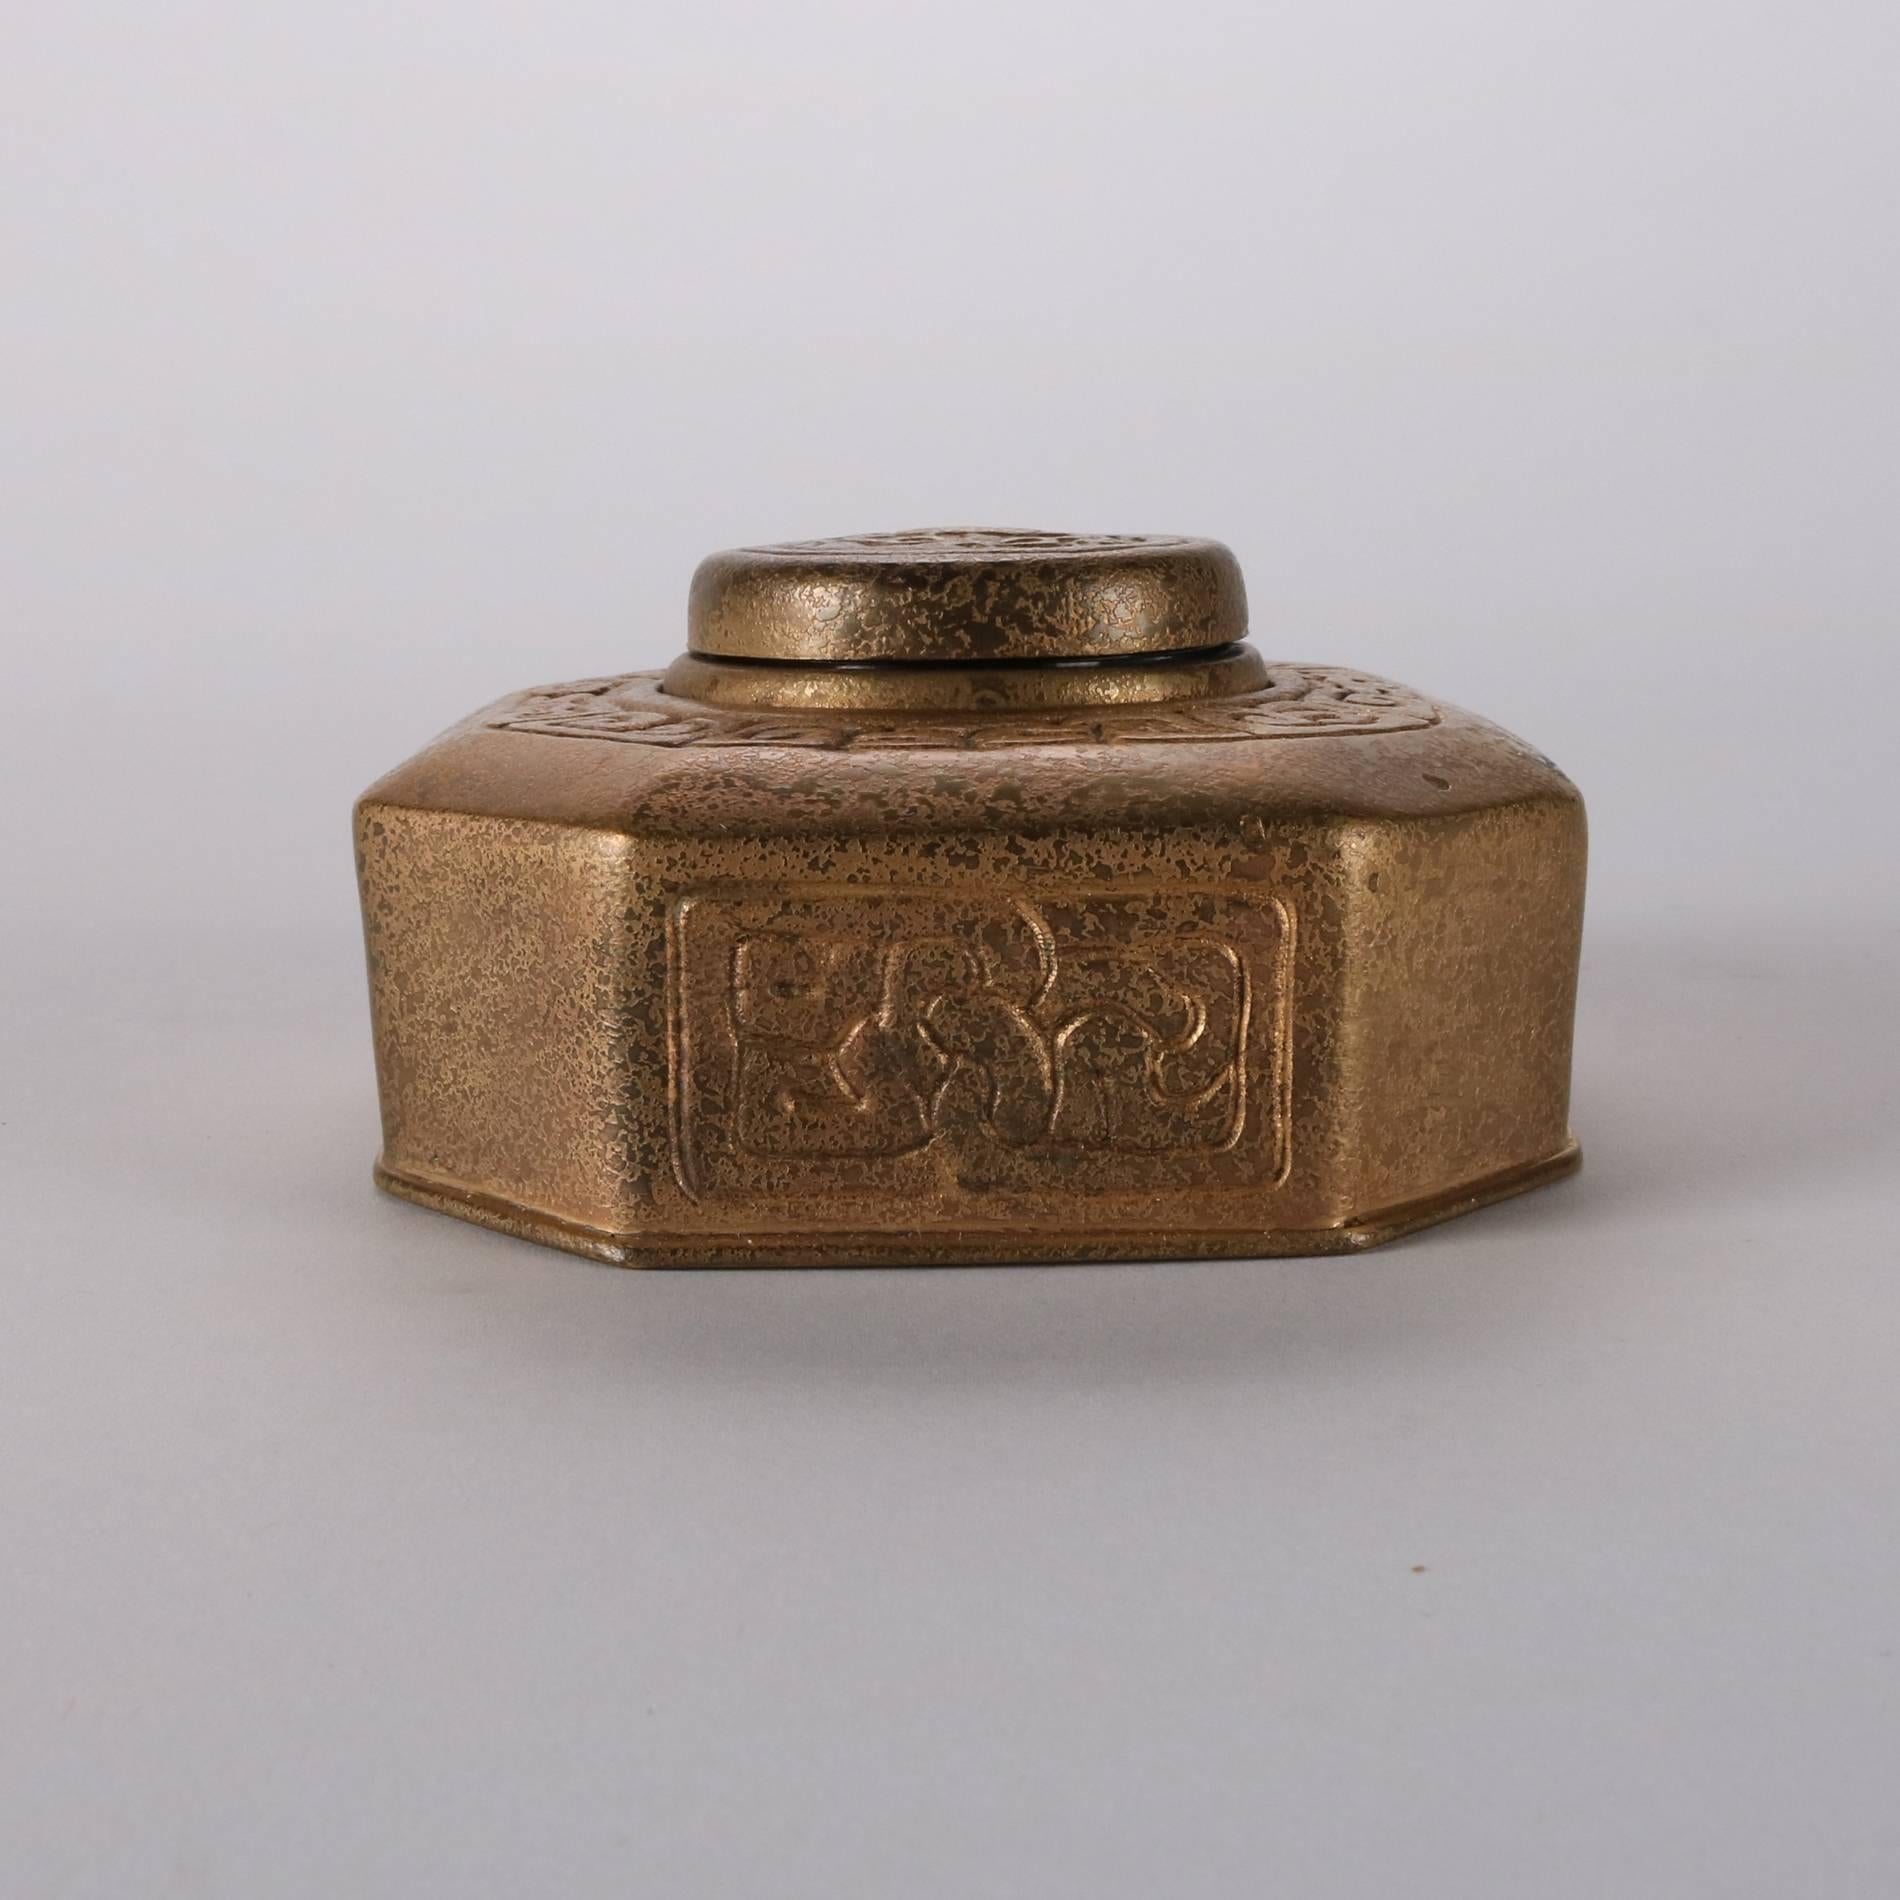 Antique Tiffany Studios New York bronze doré zodiac inkwell features octagonal form with stylized zodiac and Greek key pattern with Cancer crab on lid which opens to reveal glass ink insert, base signed Tiffany Studios 342, early 20th